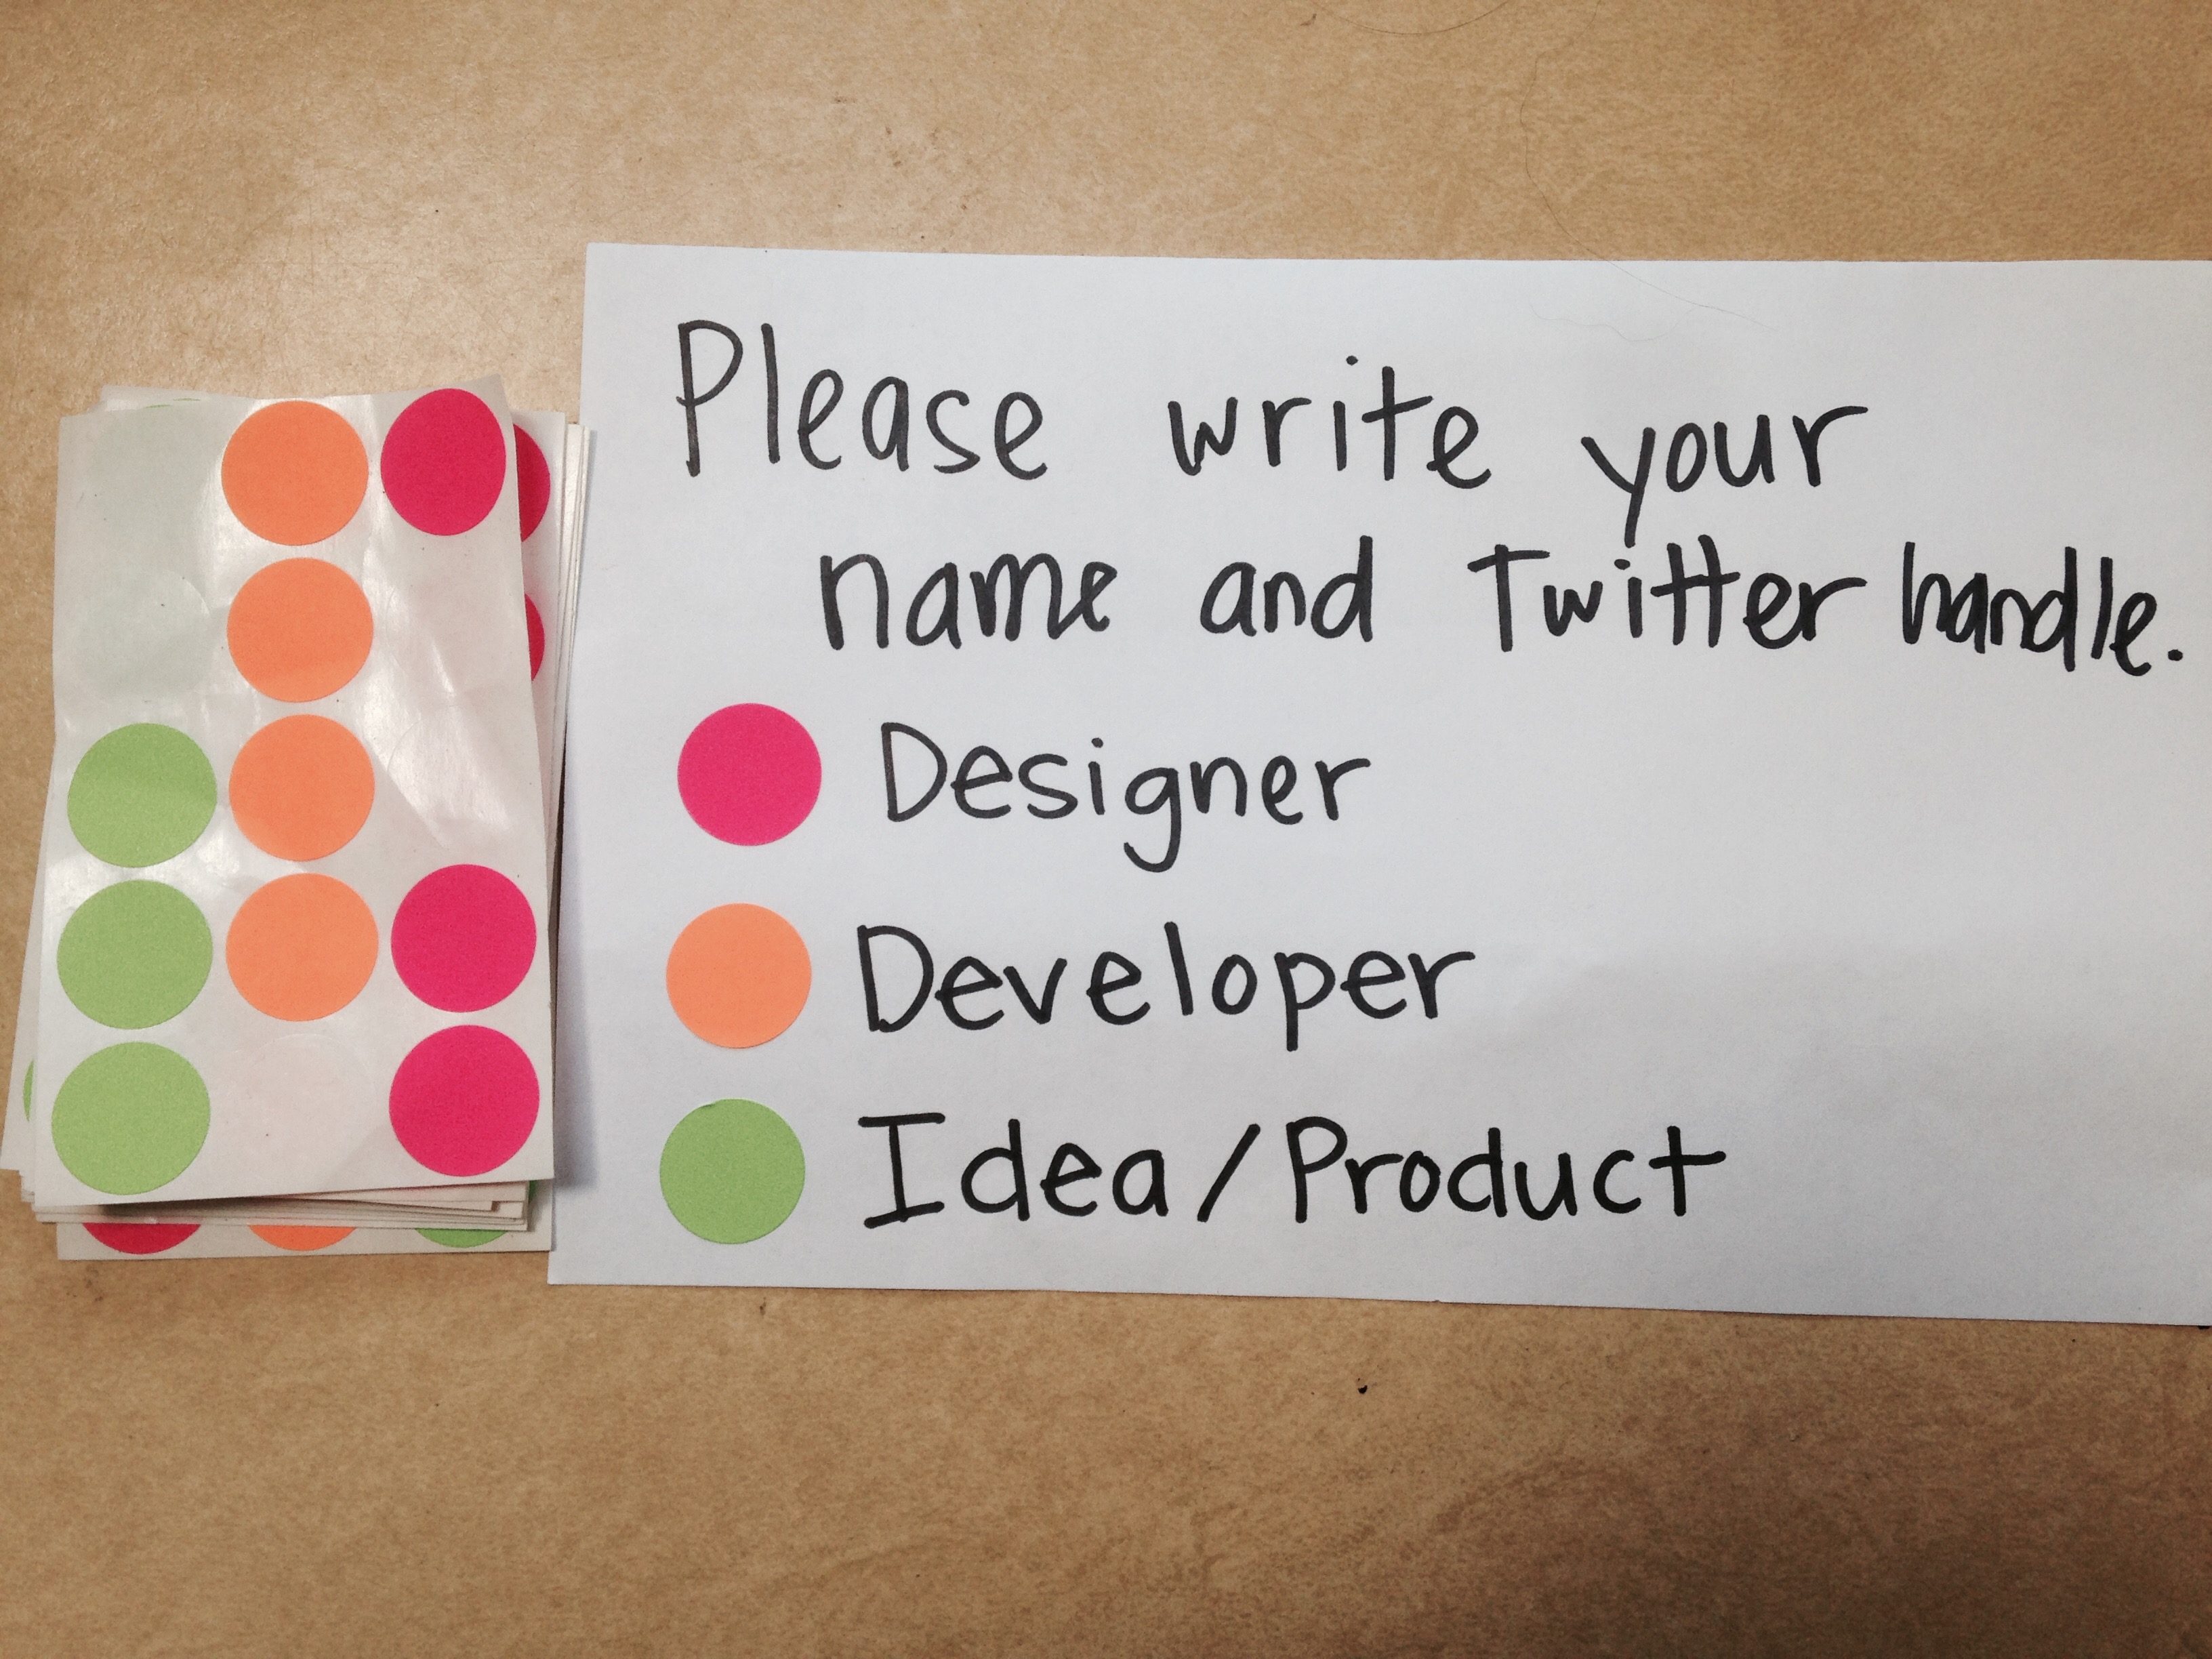 Image: nametag from recent hackathon showing color-coded stickers for devs, designers, and content strategists